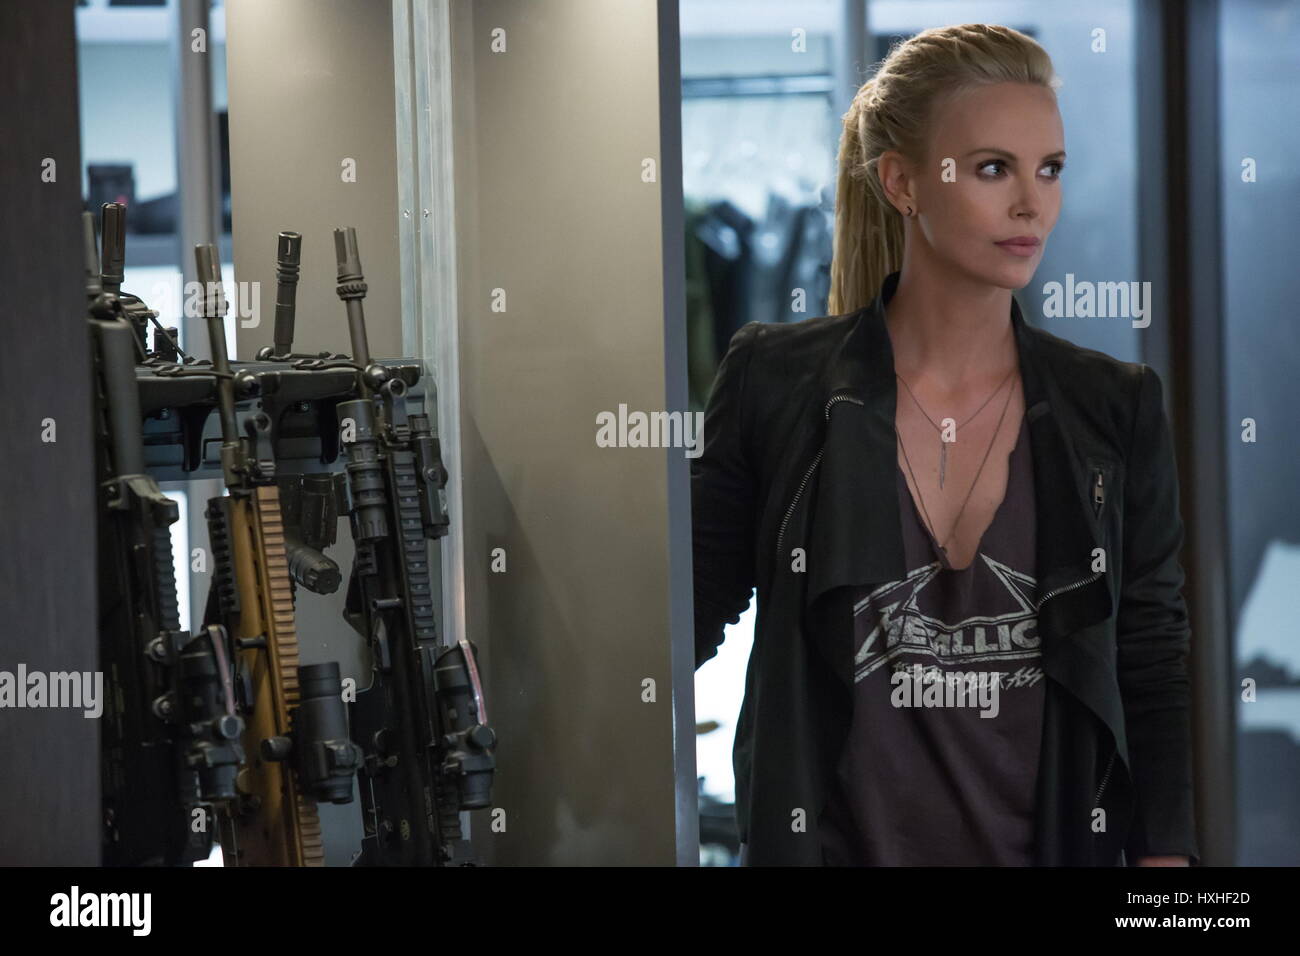 RELEASE DATE: April 14, 2017 TITLE: The Fate of the Furious STUDIO: Universal Pictures DIRECTOR: F. Gary Gray PLOT: When a mysterious woman seduces Dom into the world of crime and a betrayal of those closest to him, the crew face trials that will test them as never before PICTURED: Charlize Theron as Cipher. (Credit Image: © Universal Pictures/Entertainment Pictures/ZUMAPRESS.com) Stock Photo